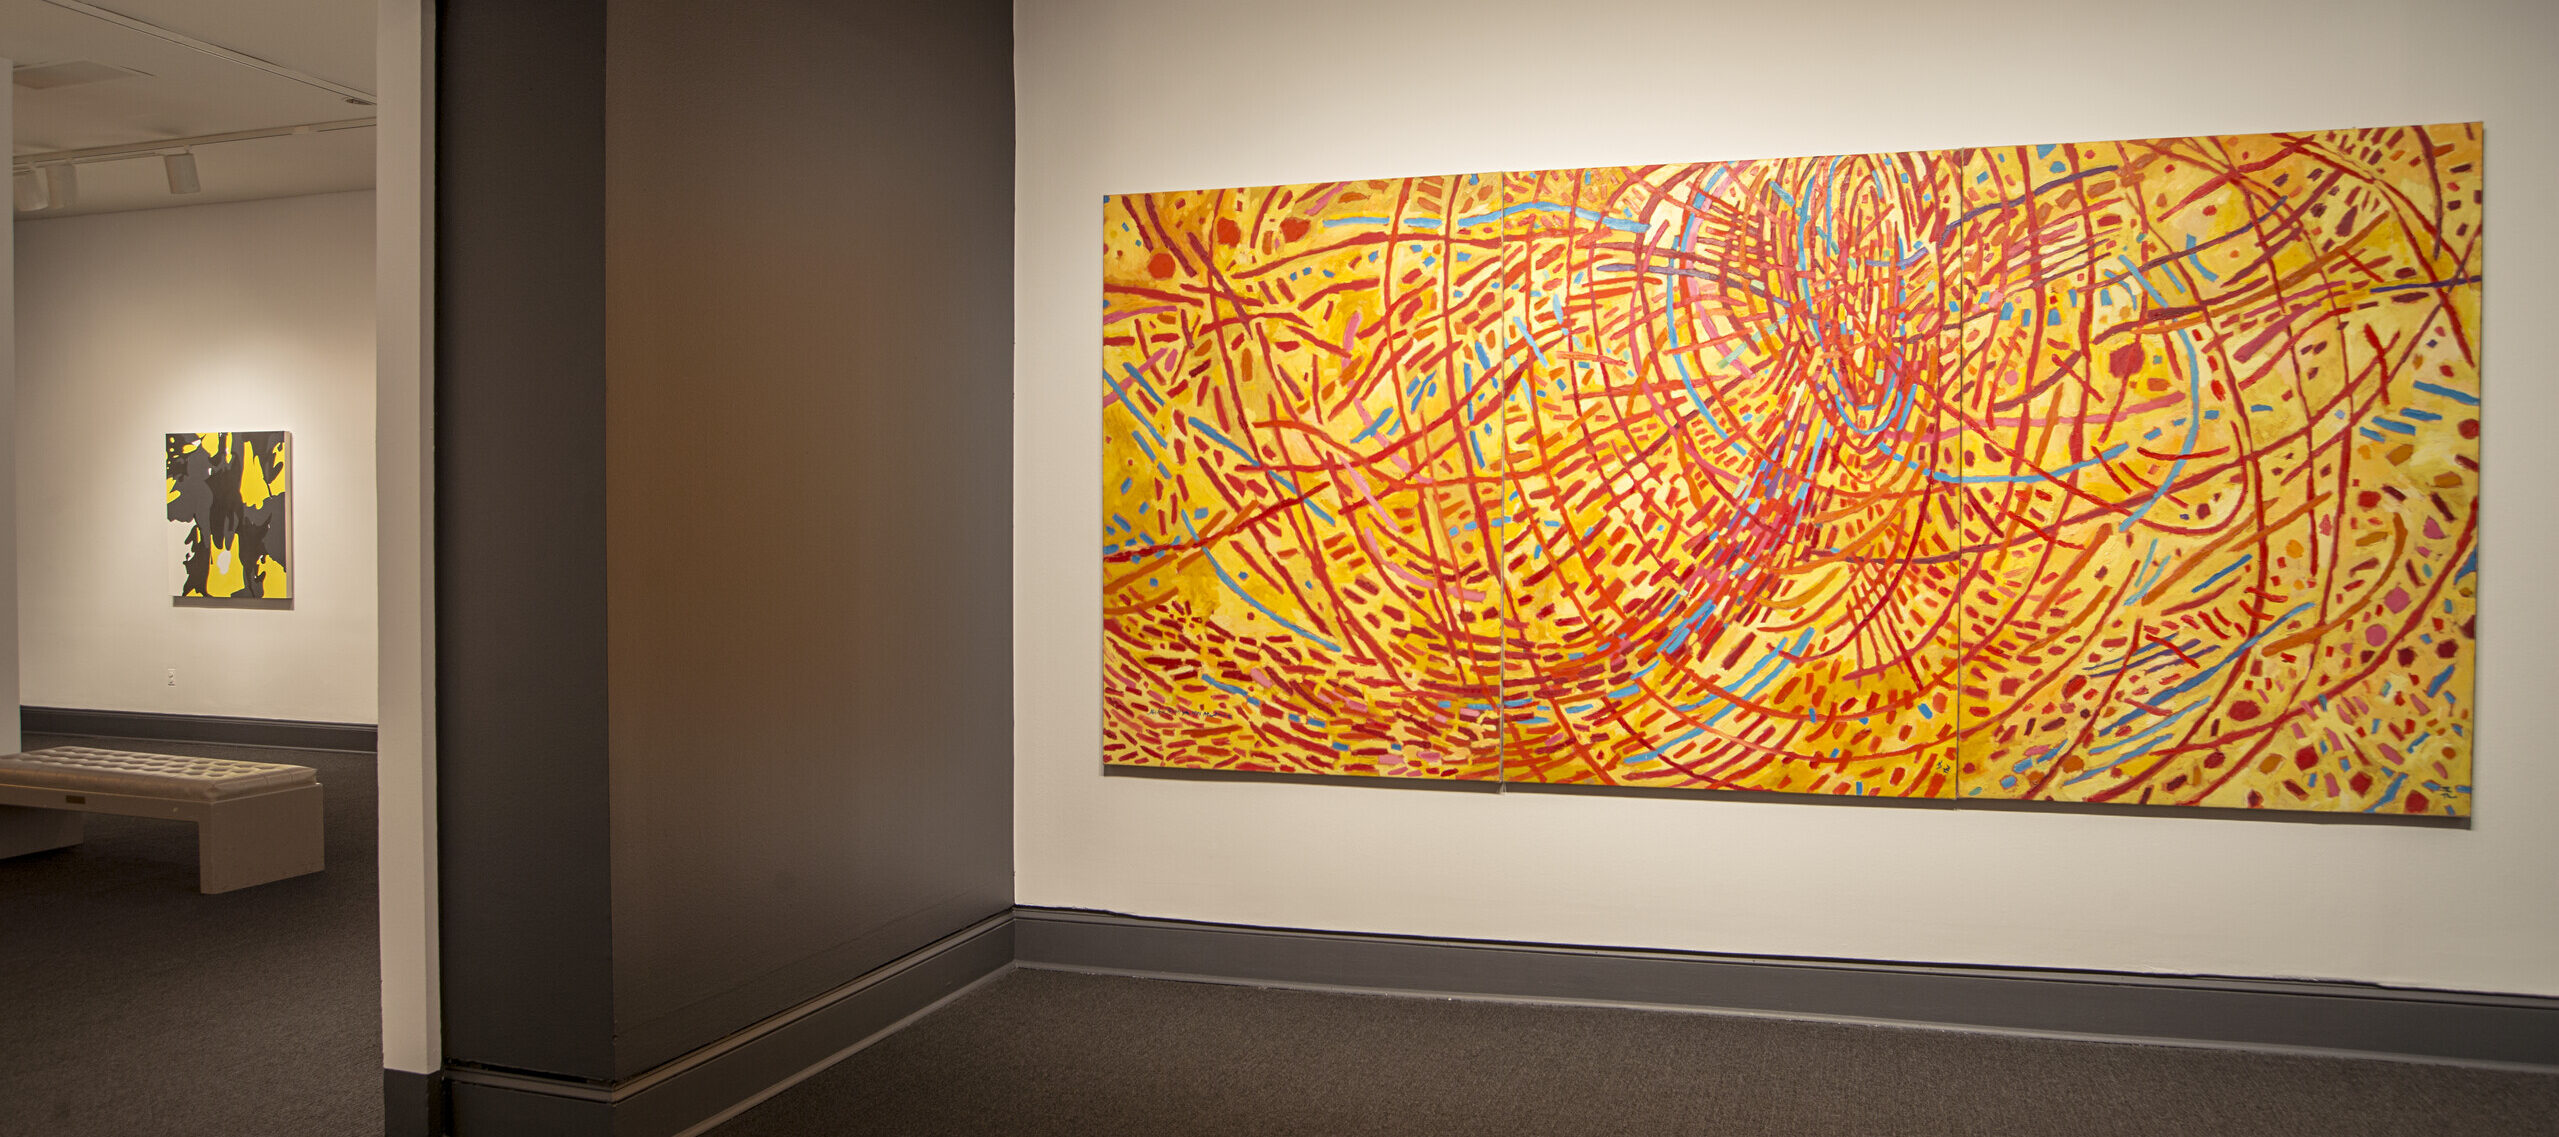 An installation shot of a gallery with a large painting hanging on the wall. Abstract painting features a vivid yellow background covered by circles, daubs, and straight and wavy lines in red, orange, cobalt, sky blue, and violet. Arcing red strokes evoke concentric circles. Straight lines in other hues radiate out from the center circle like a starburst.